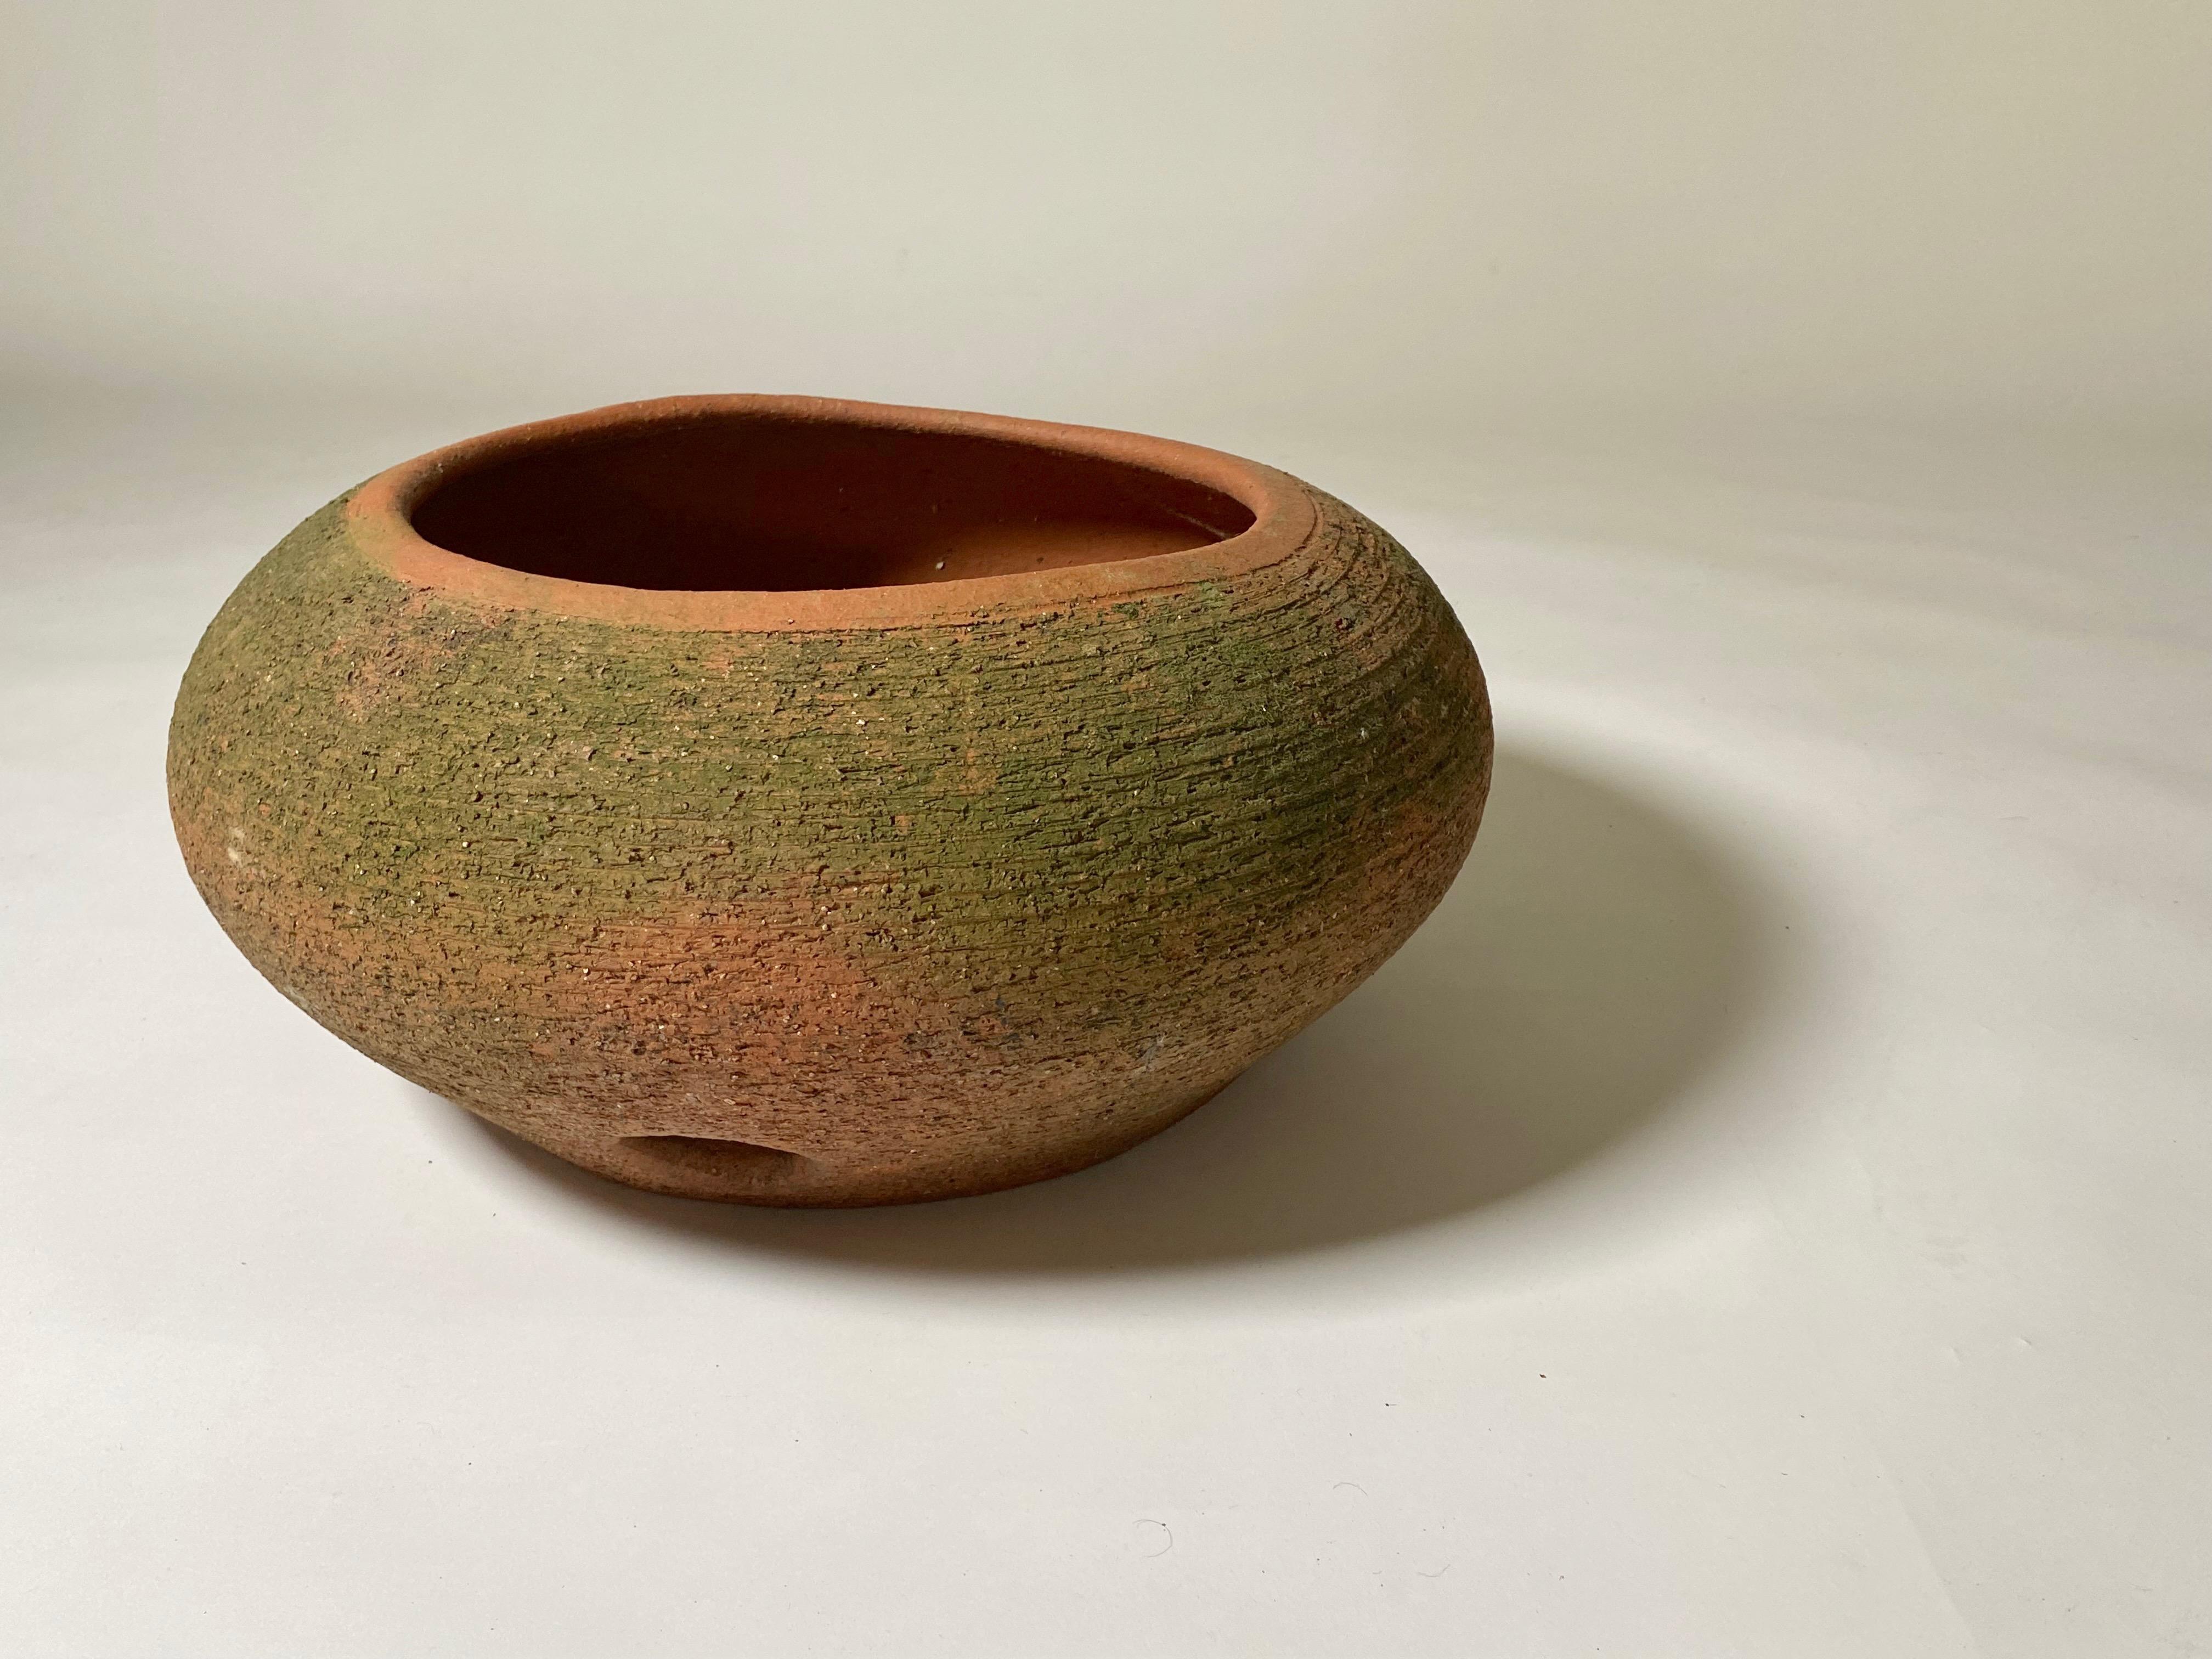 Adobe hose pot designed by California artist Stan Bitters, made with a special formulation of adobe clay created by Hans Sumpf. This one was created in the 1970s and are designed to hold the garden hose, keep it out of site and tidy, signed by the